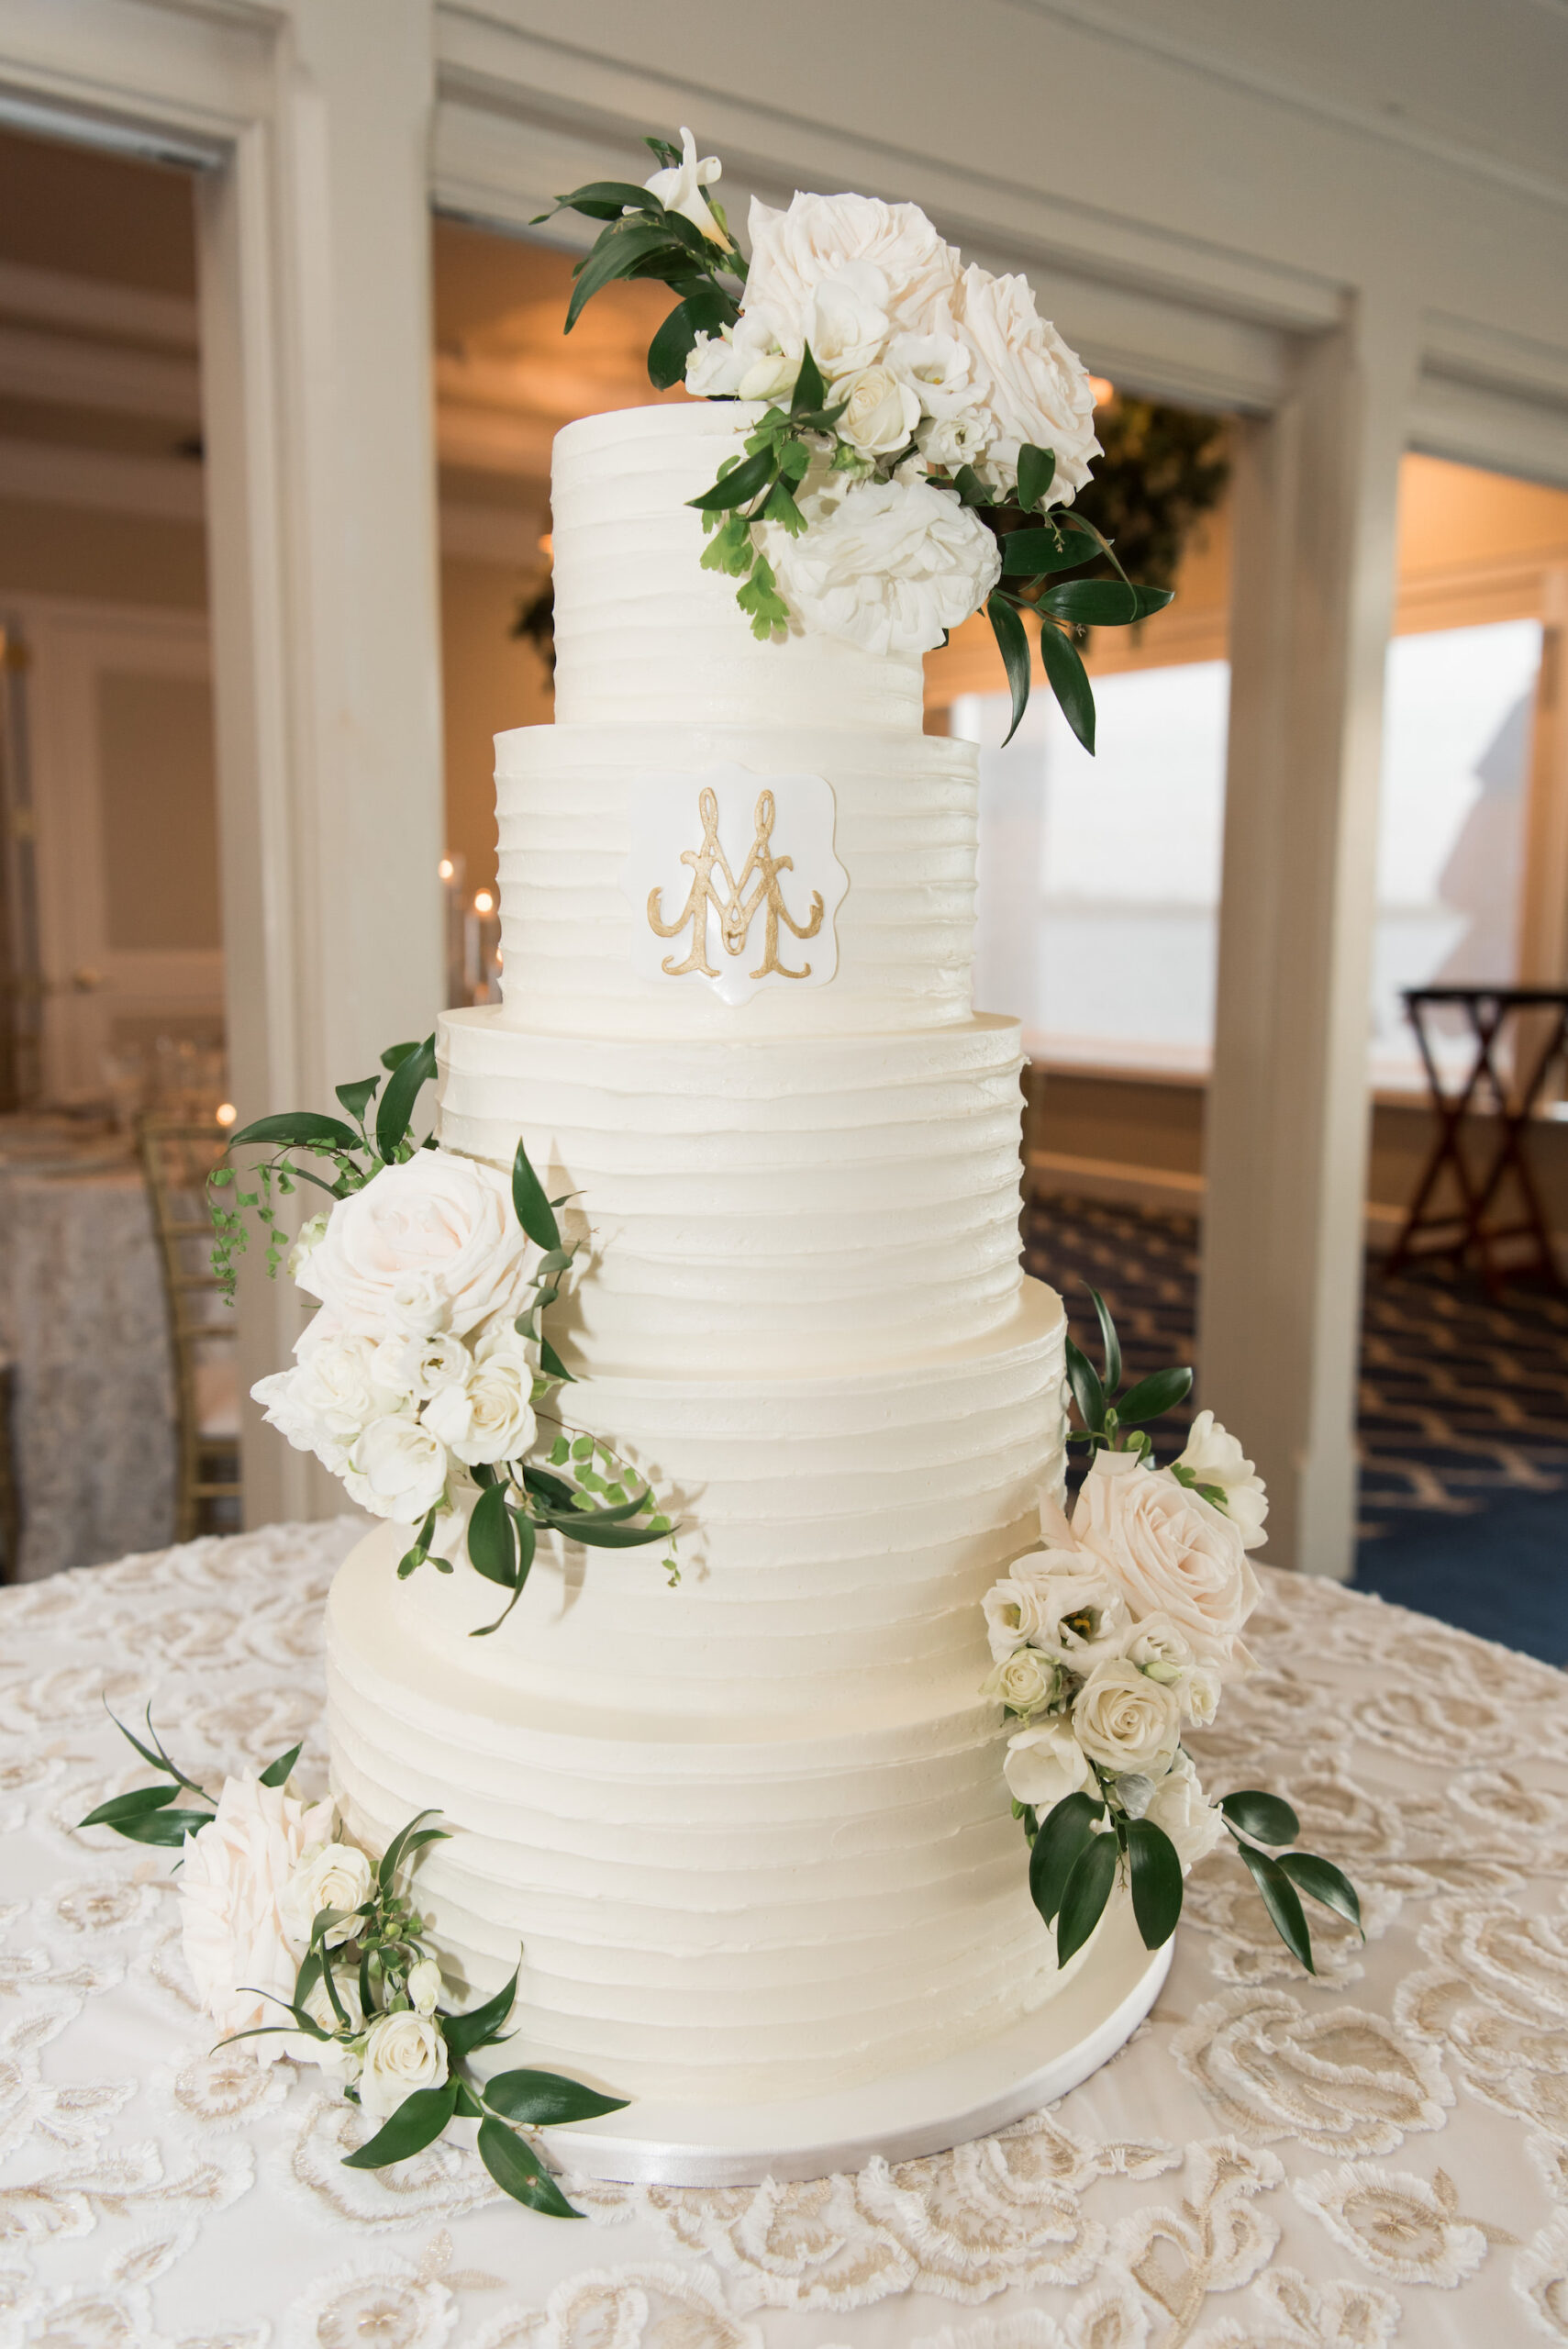 Five Tiered Round White Buttercream Wedding Cake with White Roses and Greenery Accents | Timeless Wedding Reception Dessert Table Inspiration